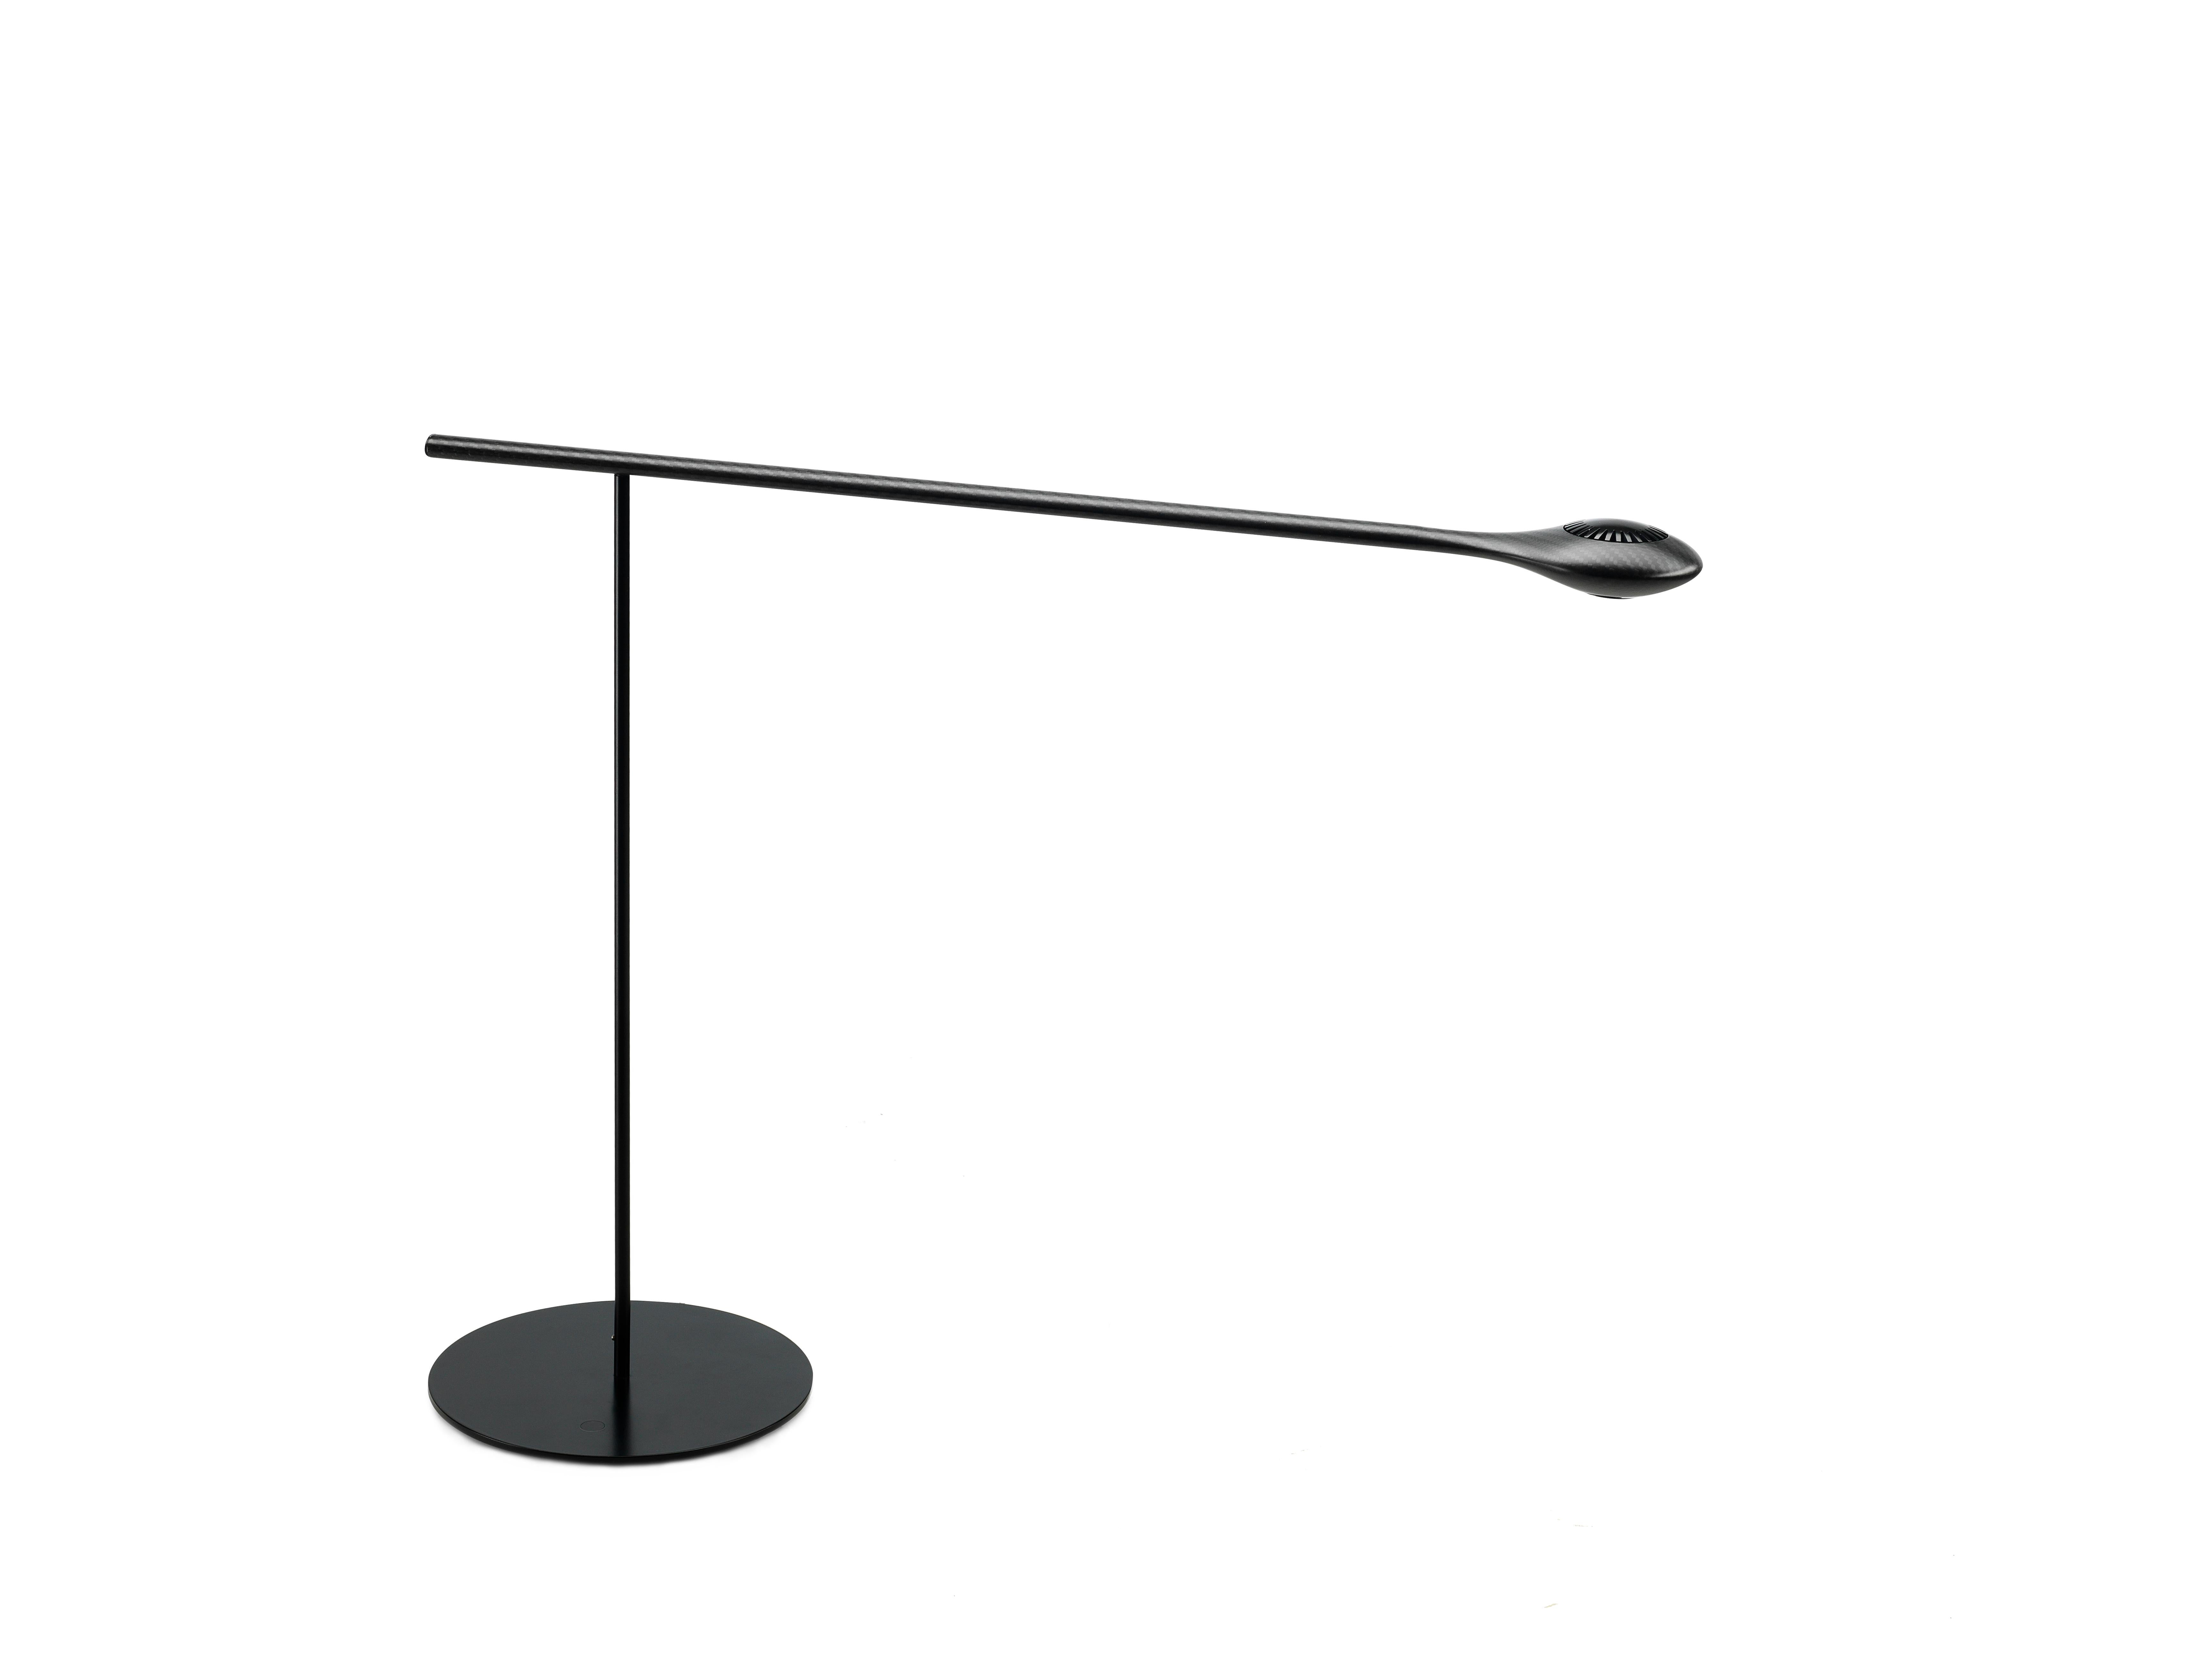 Carbon table light, a new addition to the carbon light product family, is a high-tech LED task lamp made of carbon fiber. Its sleek organic yet minimal appearance will find its place on the desktop of any serious design connoisseur.

Product